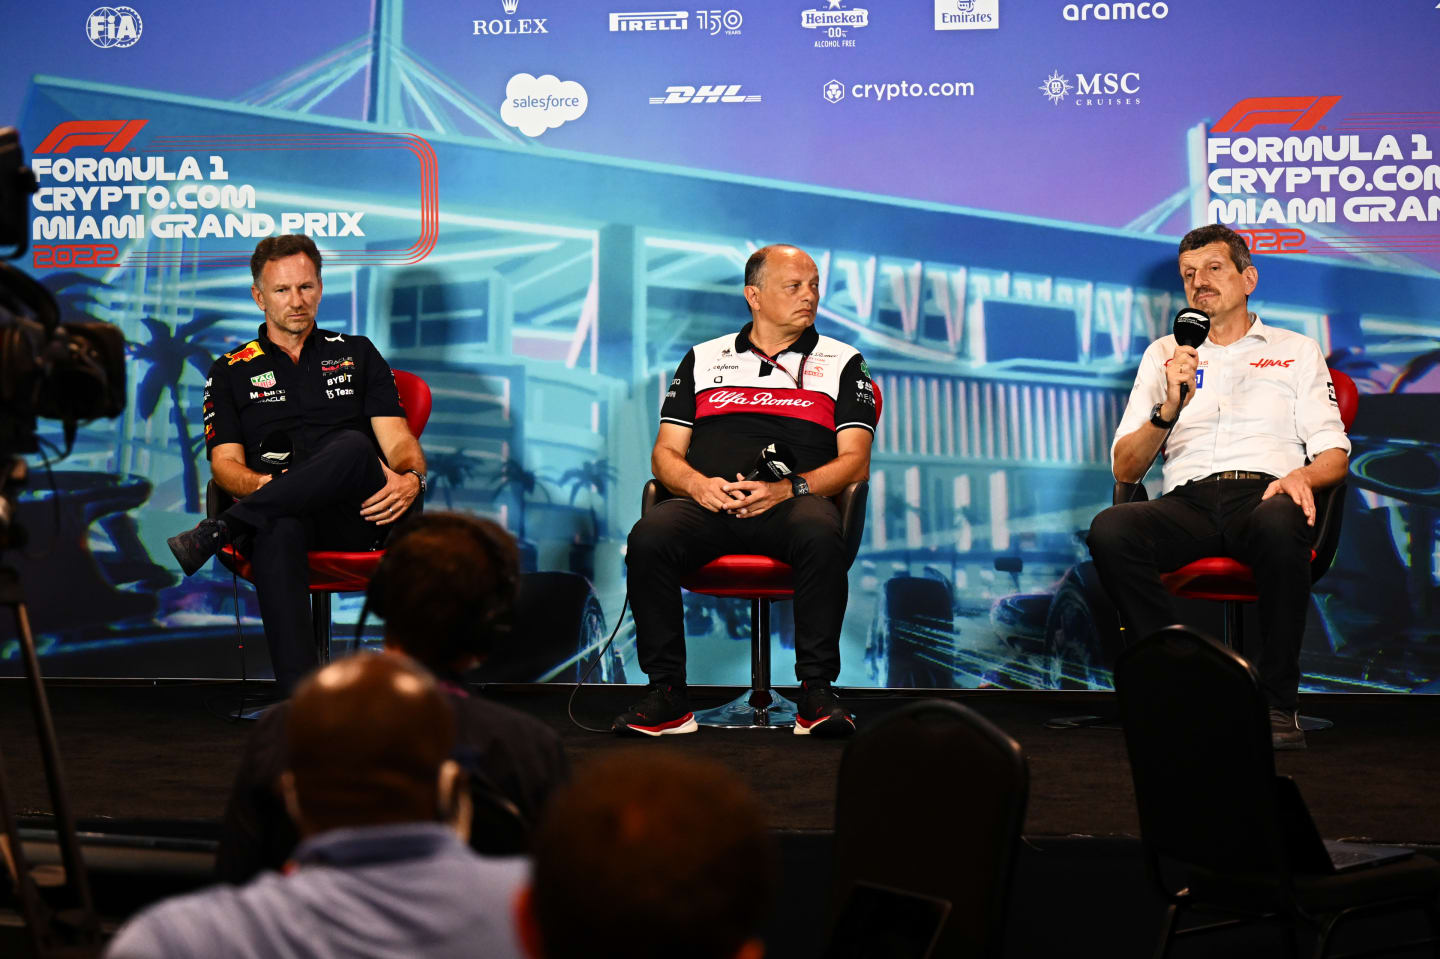 MIAMI, FLORIDA - MAY 07: (L-R) Red Bull Racing Team Principal Christian Horner, Alfa Romeo Racing Team Principal Frederic Vasseur and Haas F1 Team Principal Guenther Steiner attend the Team Principals Press Conference prior to final practice ahead of the F1 Grand Prix of Miami at the Miami International Autodrome on May 07, 2022 in Miami, Florida. (Photo by Clive Mason/Getty Images)